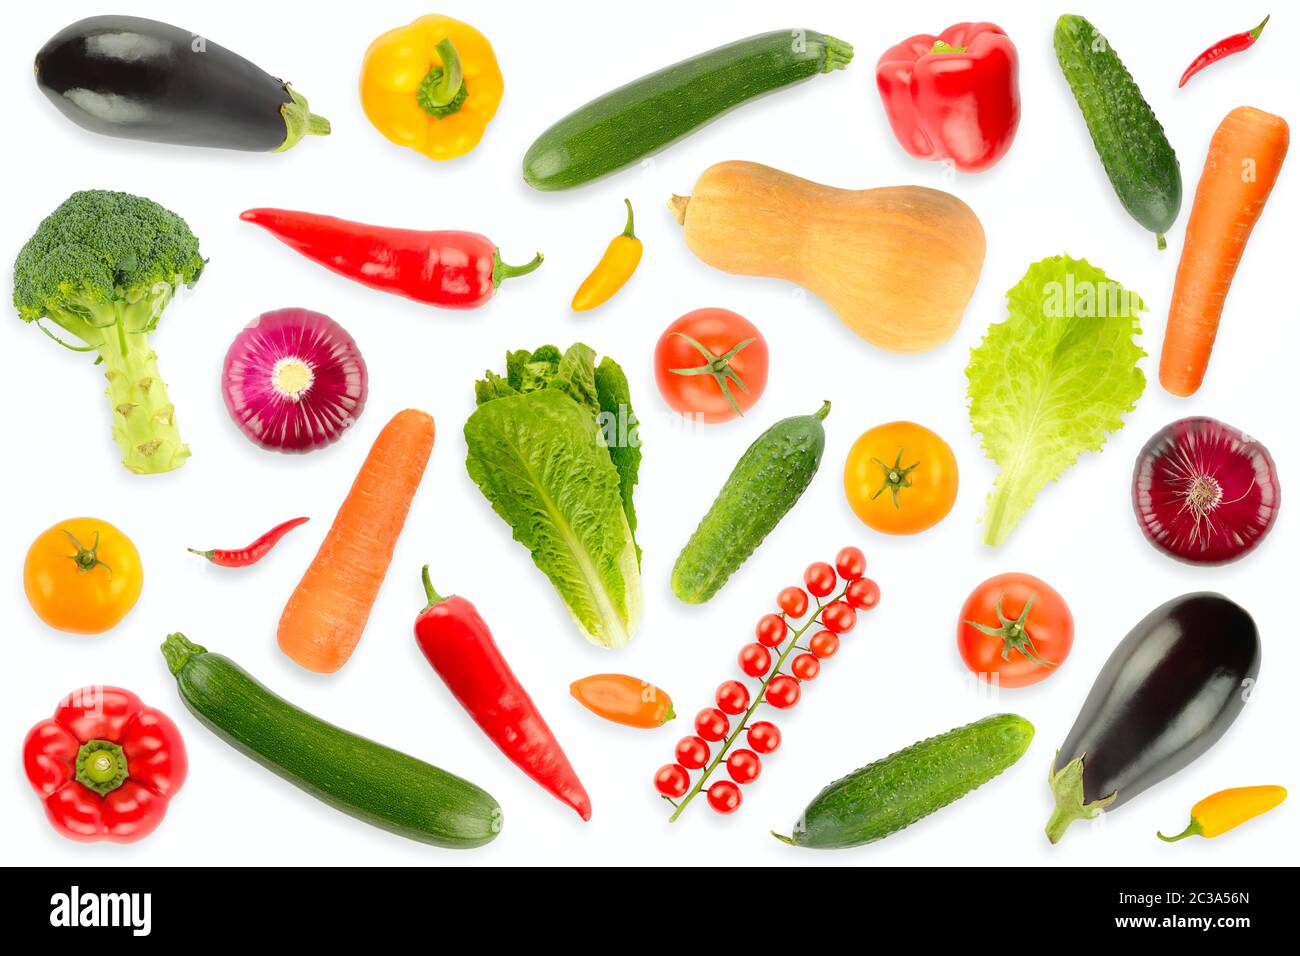 Top view on collection of fresh vegetables and fruits isolated on white background with light shadow. Stock Photo